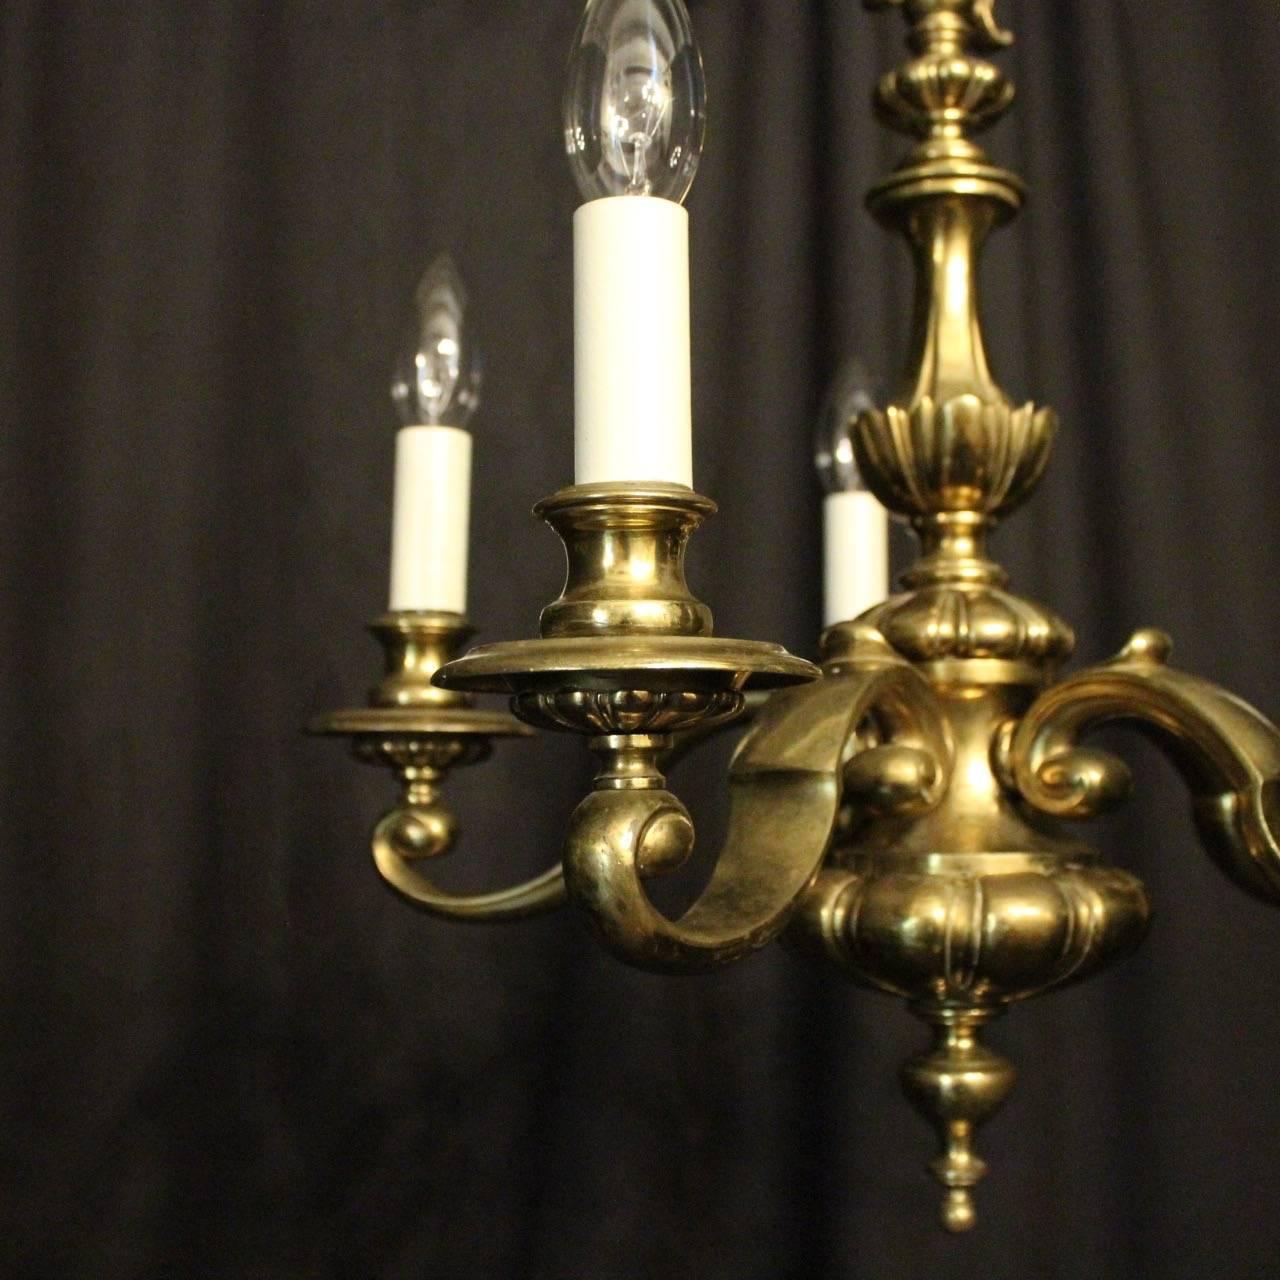 An English brass five-light antique chandelier, the decorative scrolling arms with circular bobeche drip pans and bulbous candle sconces, issuing from an ornate reeded bulbous central column, having the original ceiling rose with lovely original